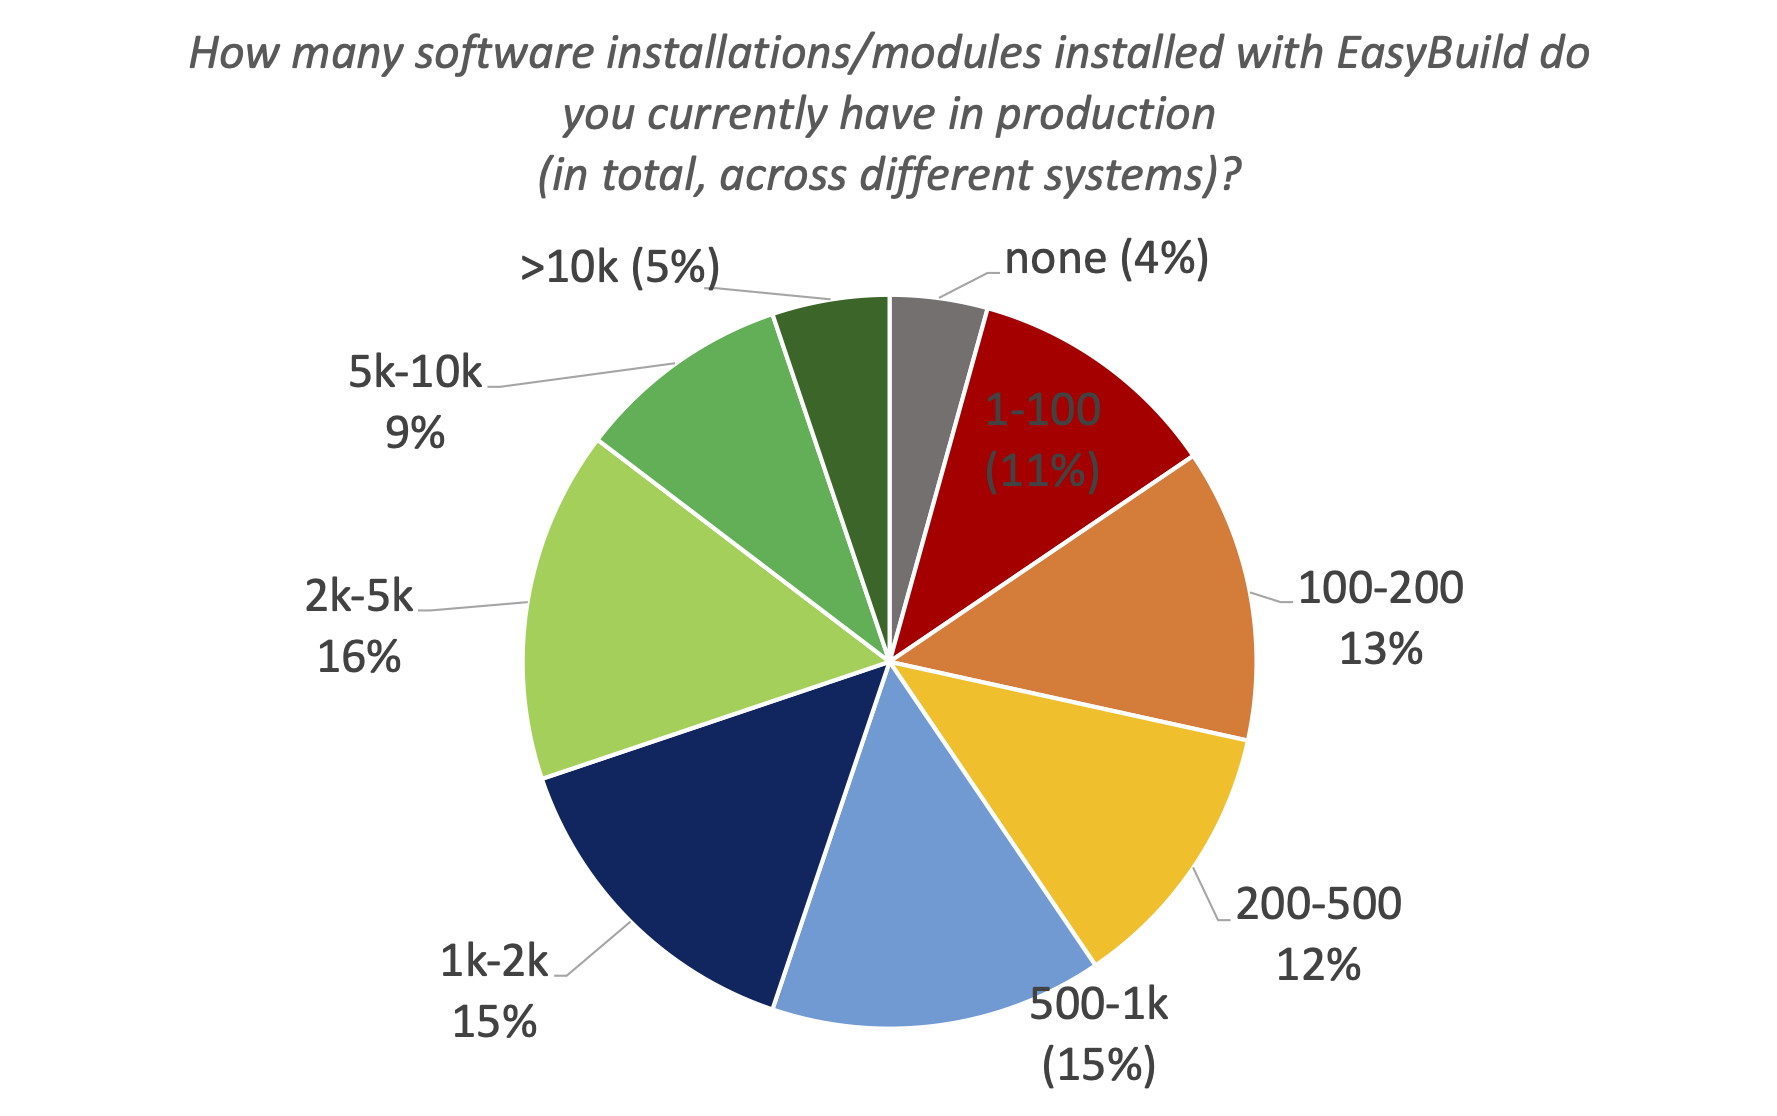 23. How many software installations/modules installed with EasyBuild do you currently have in production (in total, across different systems)?